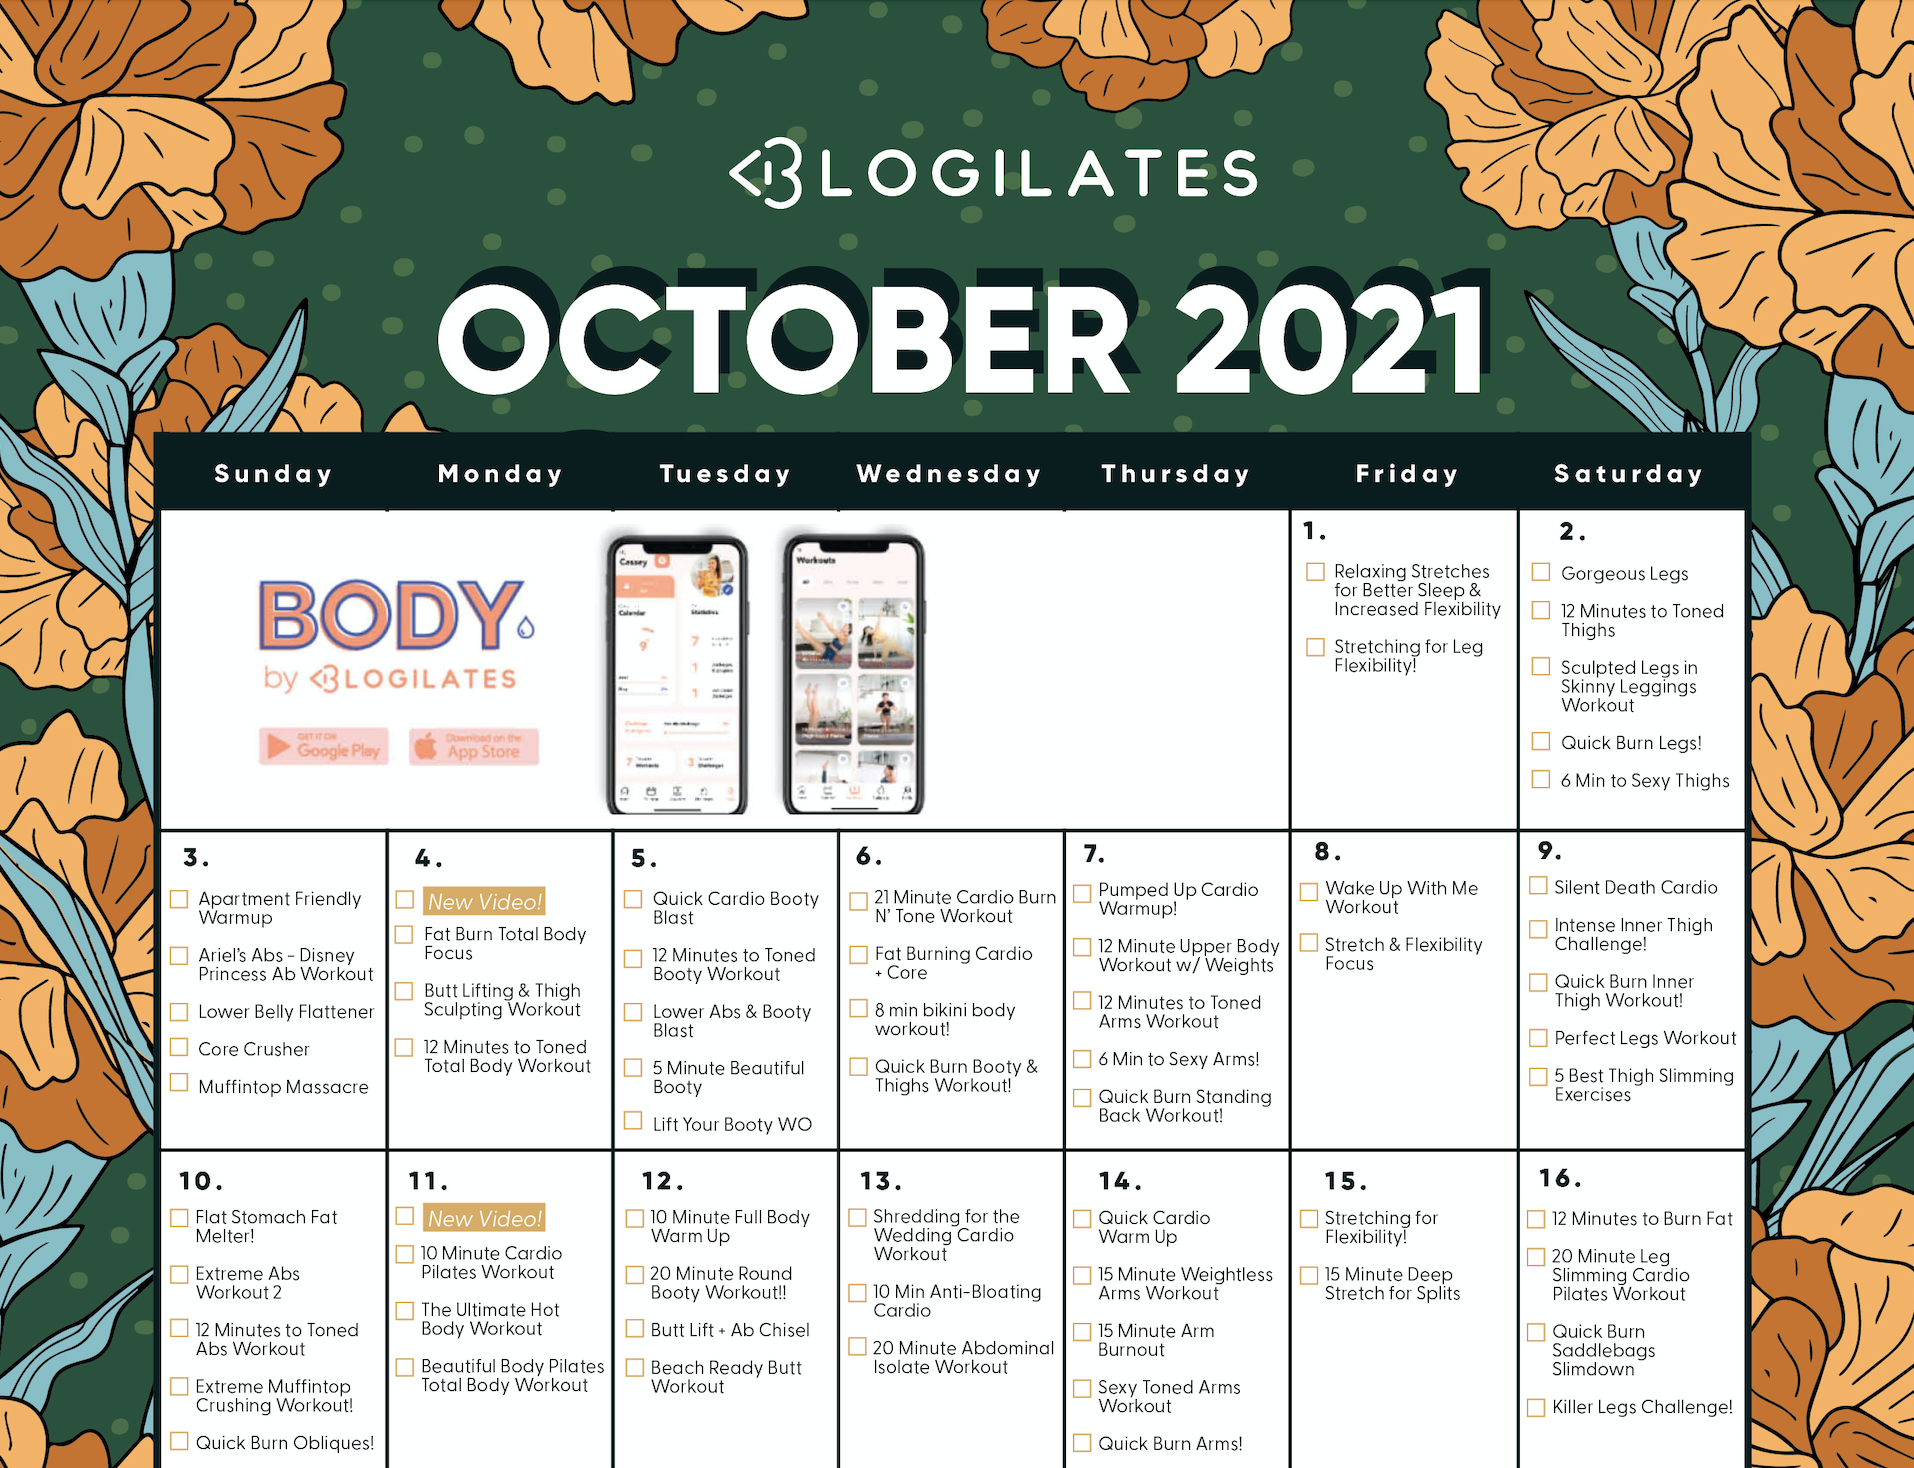 Your 2021 Challenge. You in? - Blogilates